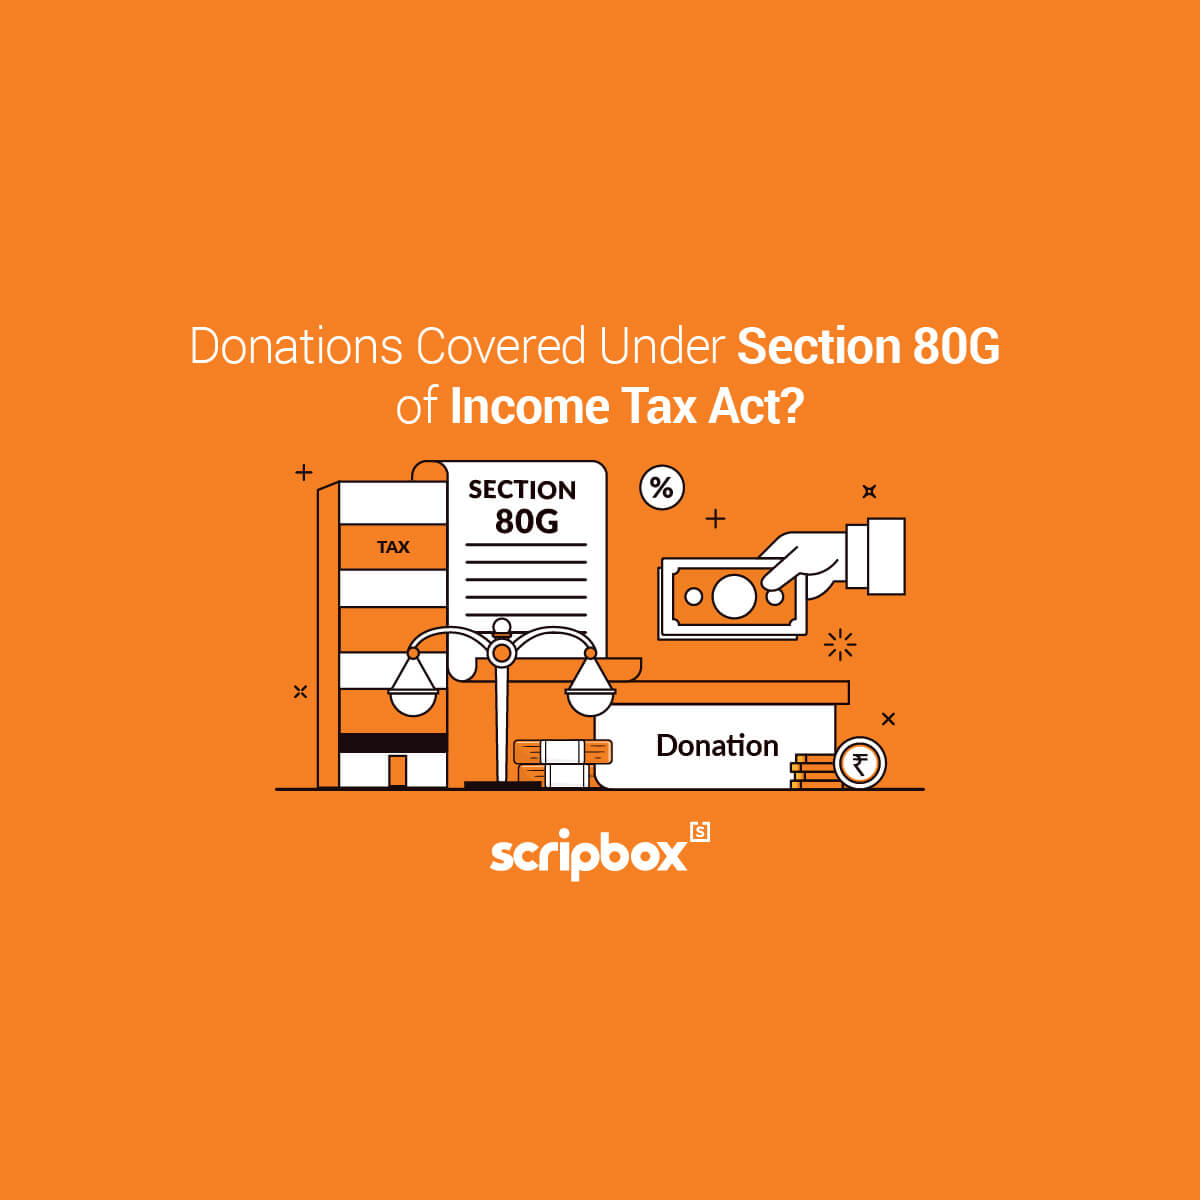 section 80g of income tax